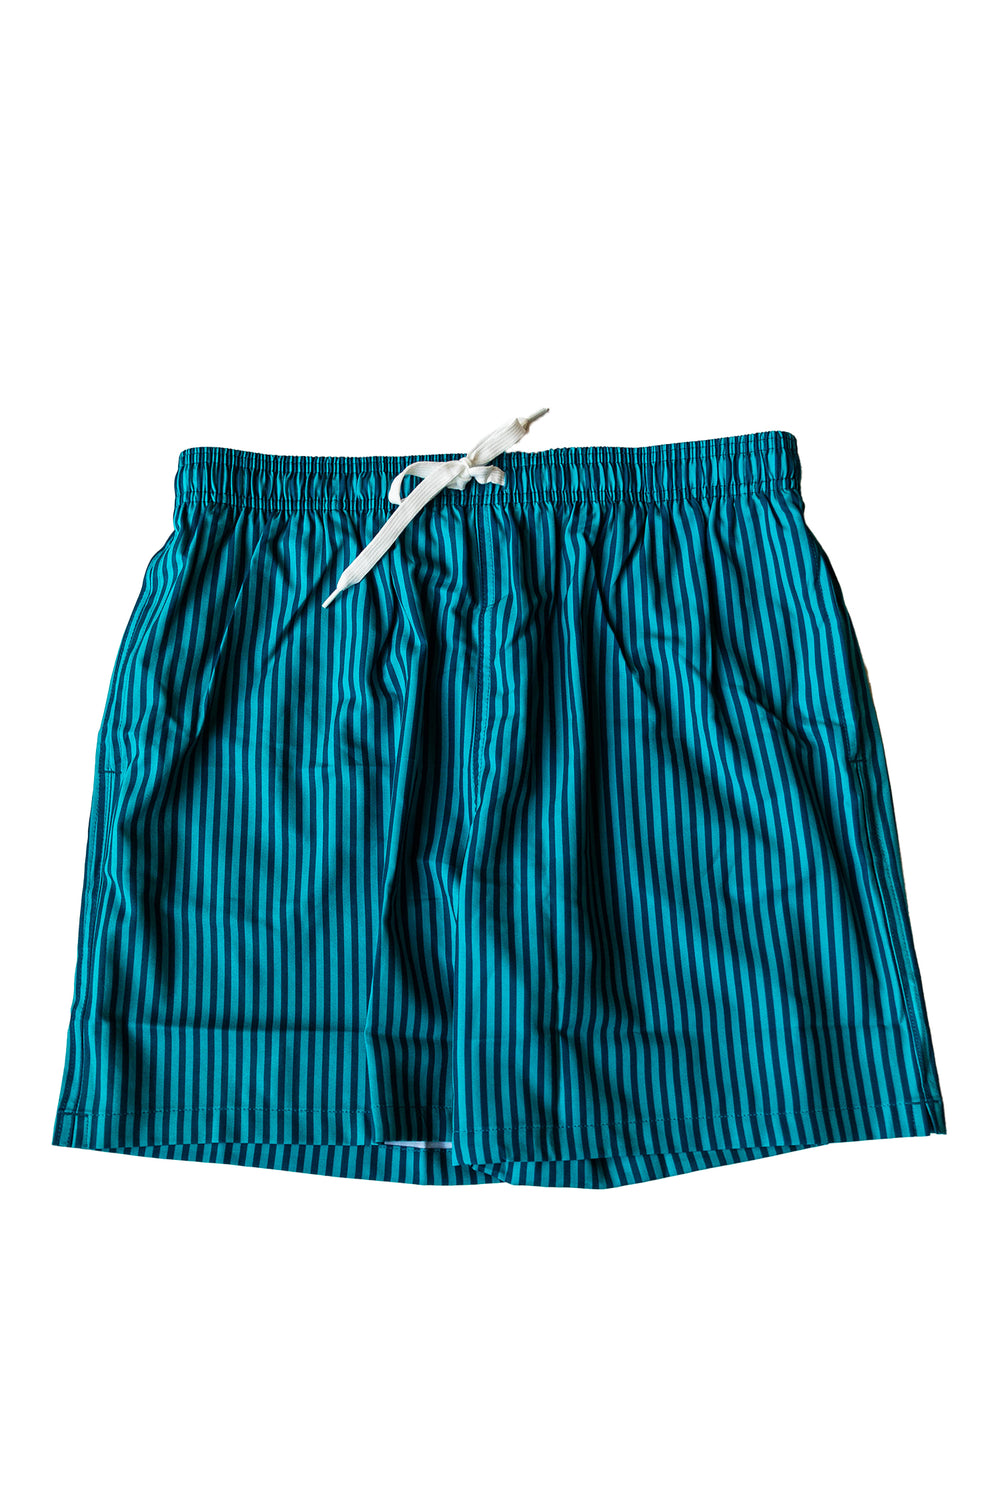 Navy and Turquoise Striped Bathing Suit